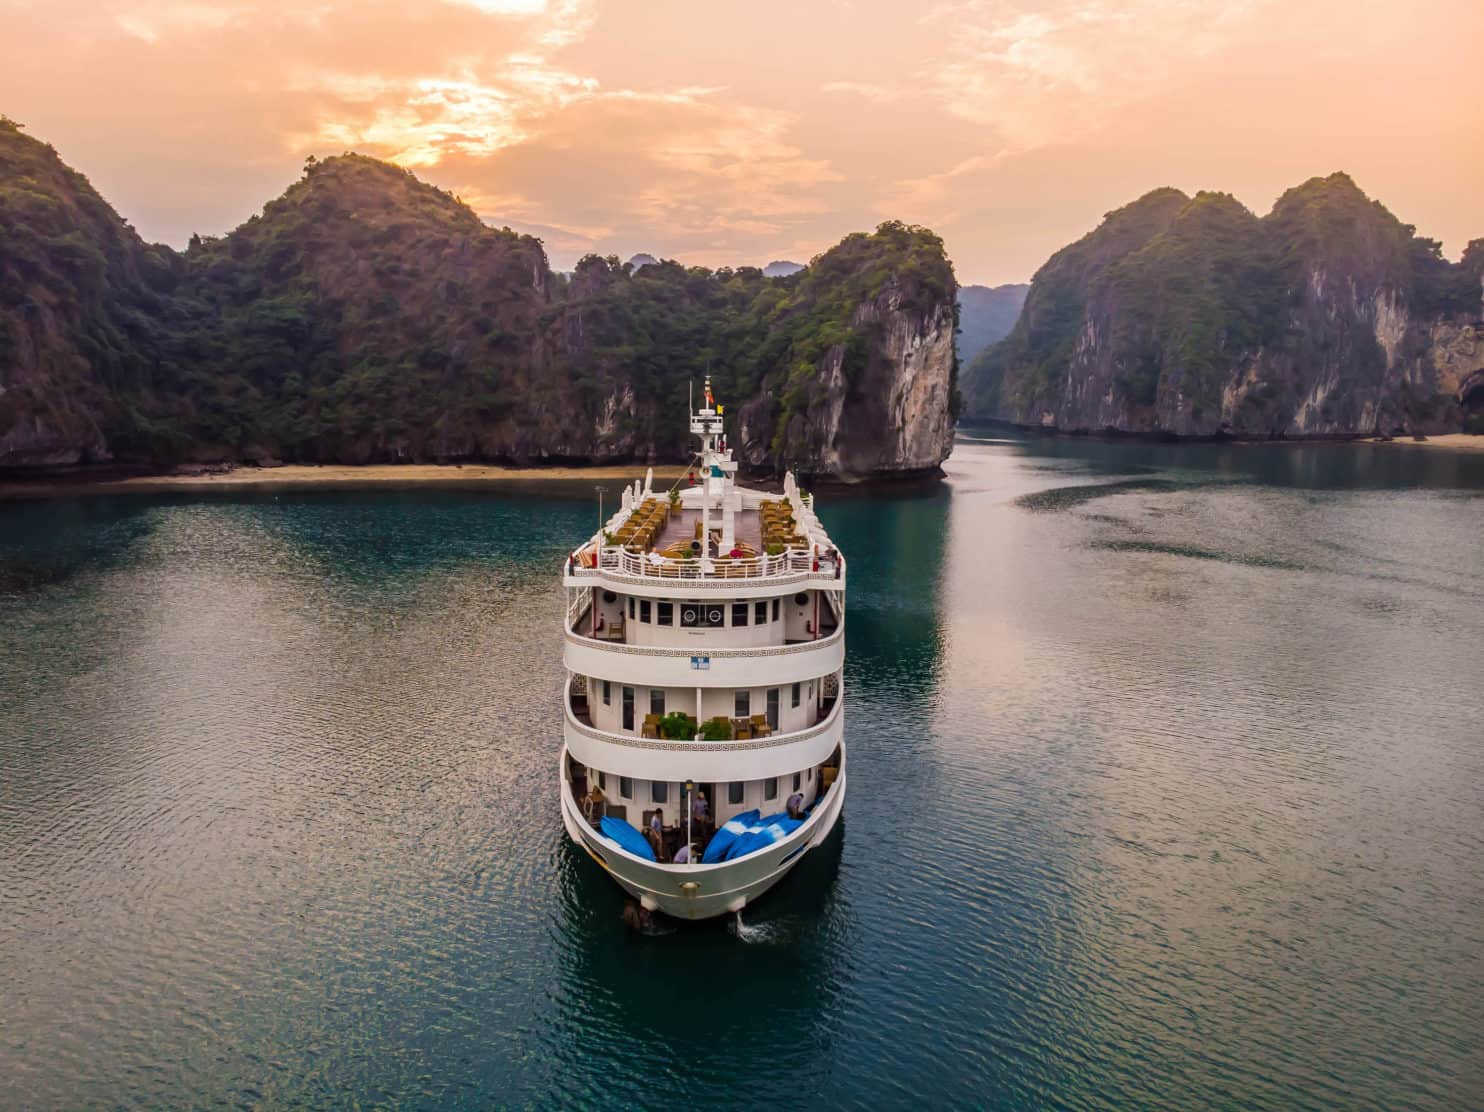 13 Halong Bay Cruise Tips To Know Before Your Trip to Vietnam